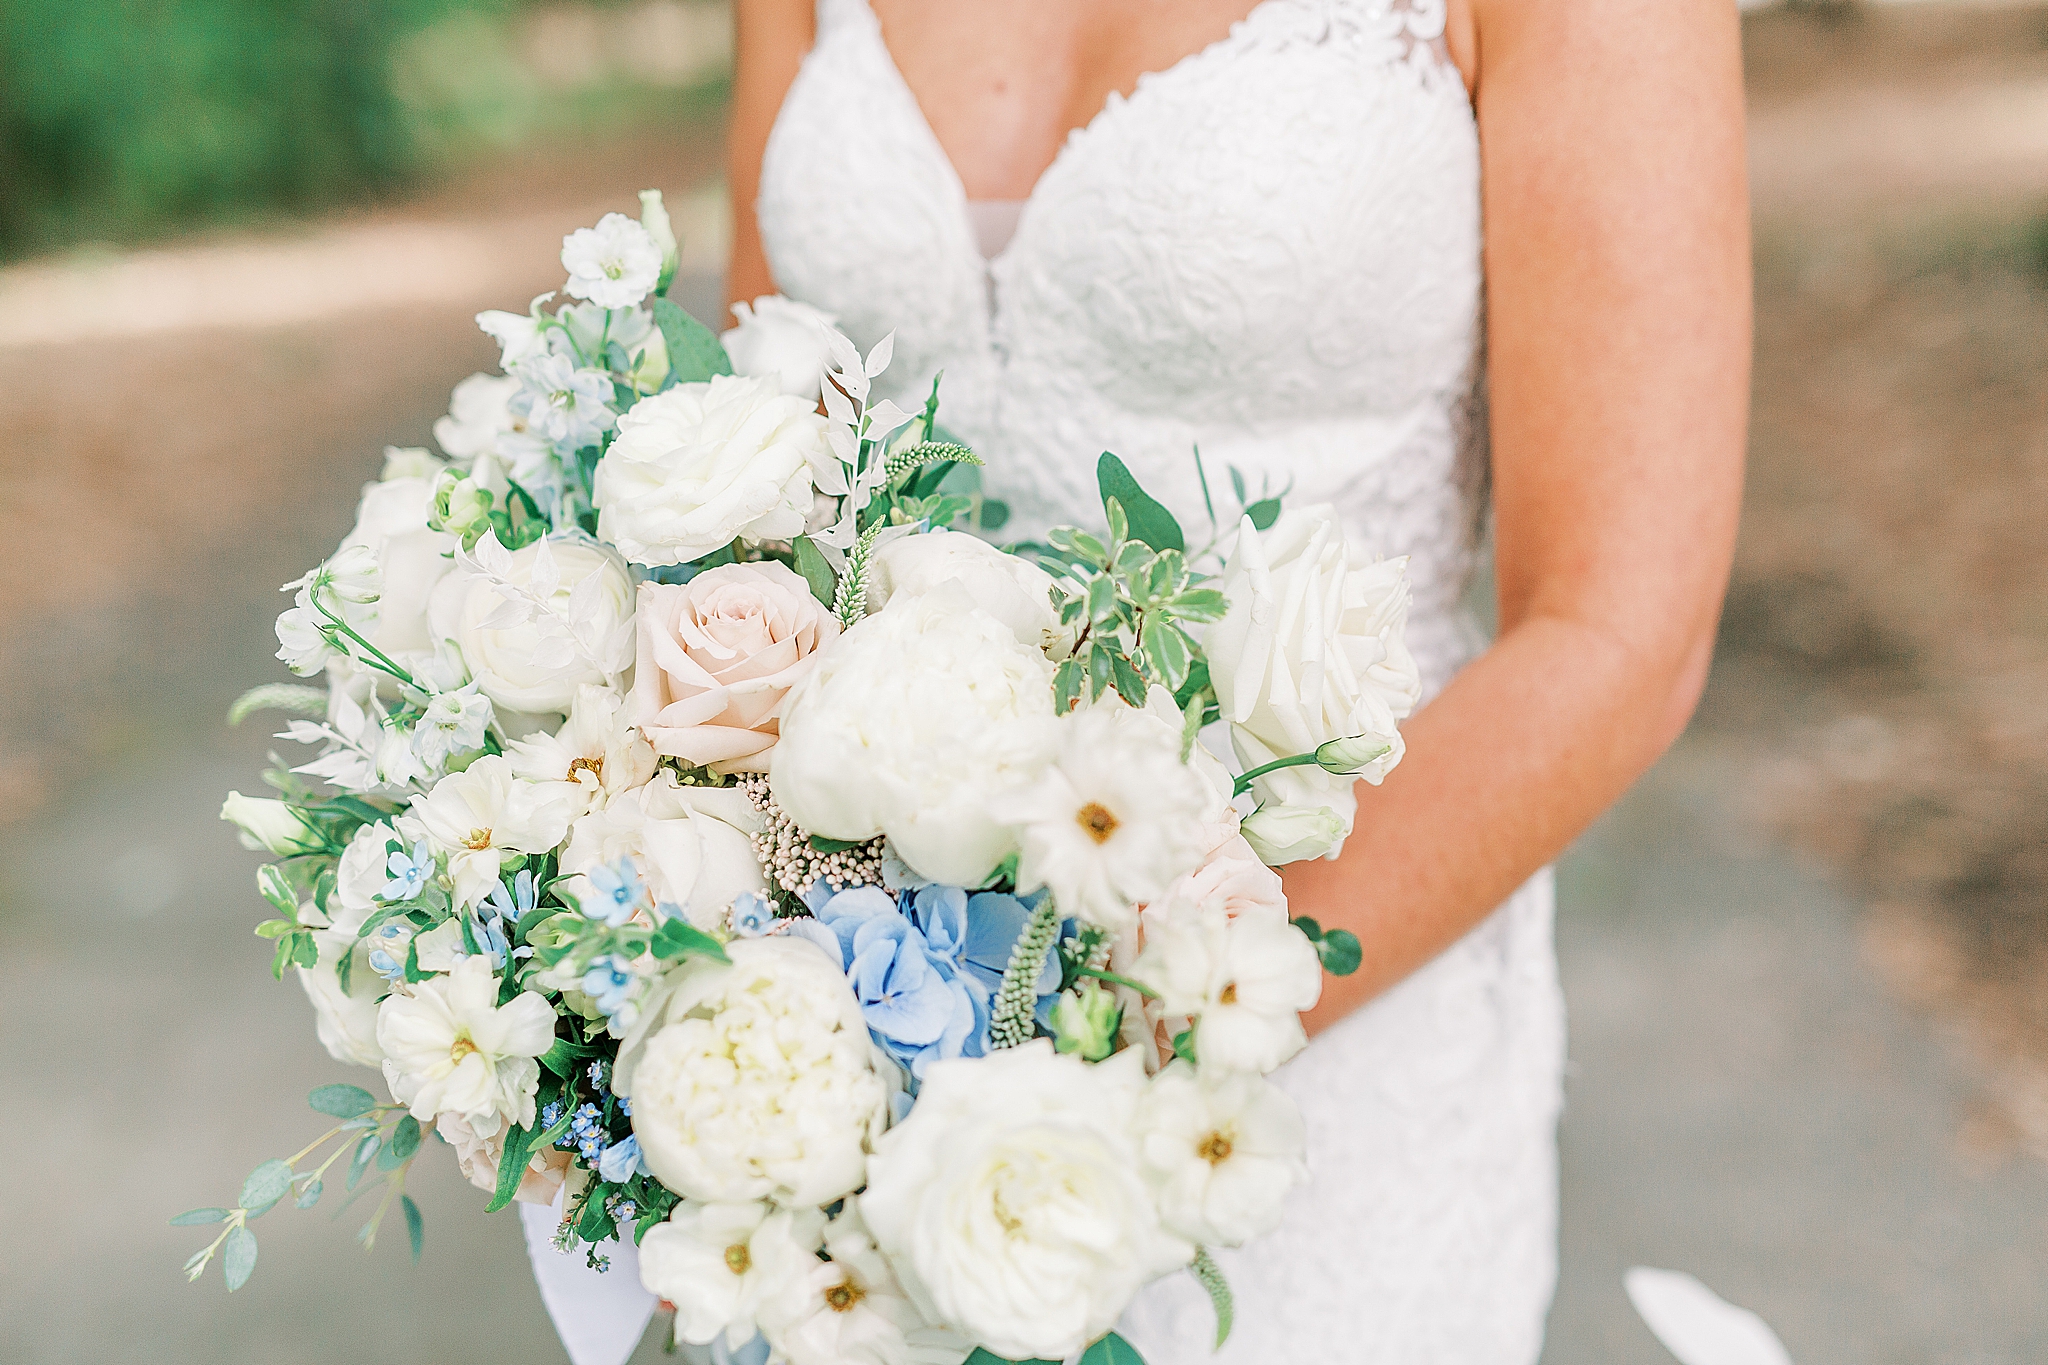 bride holds bouquet of white flowers with pink and blue accents